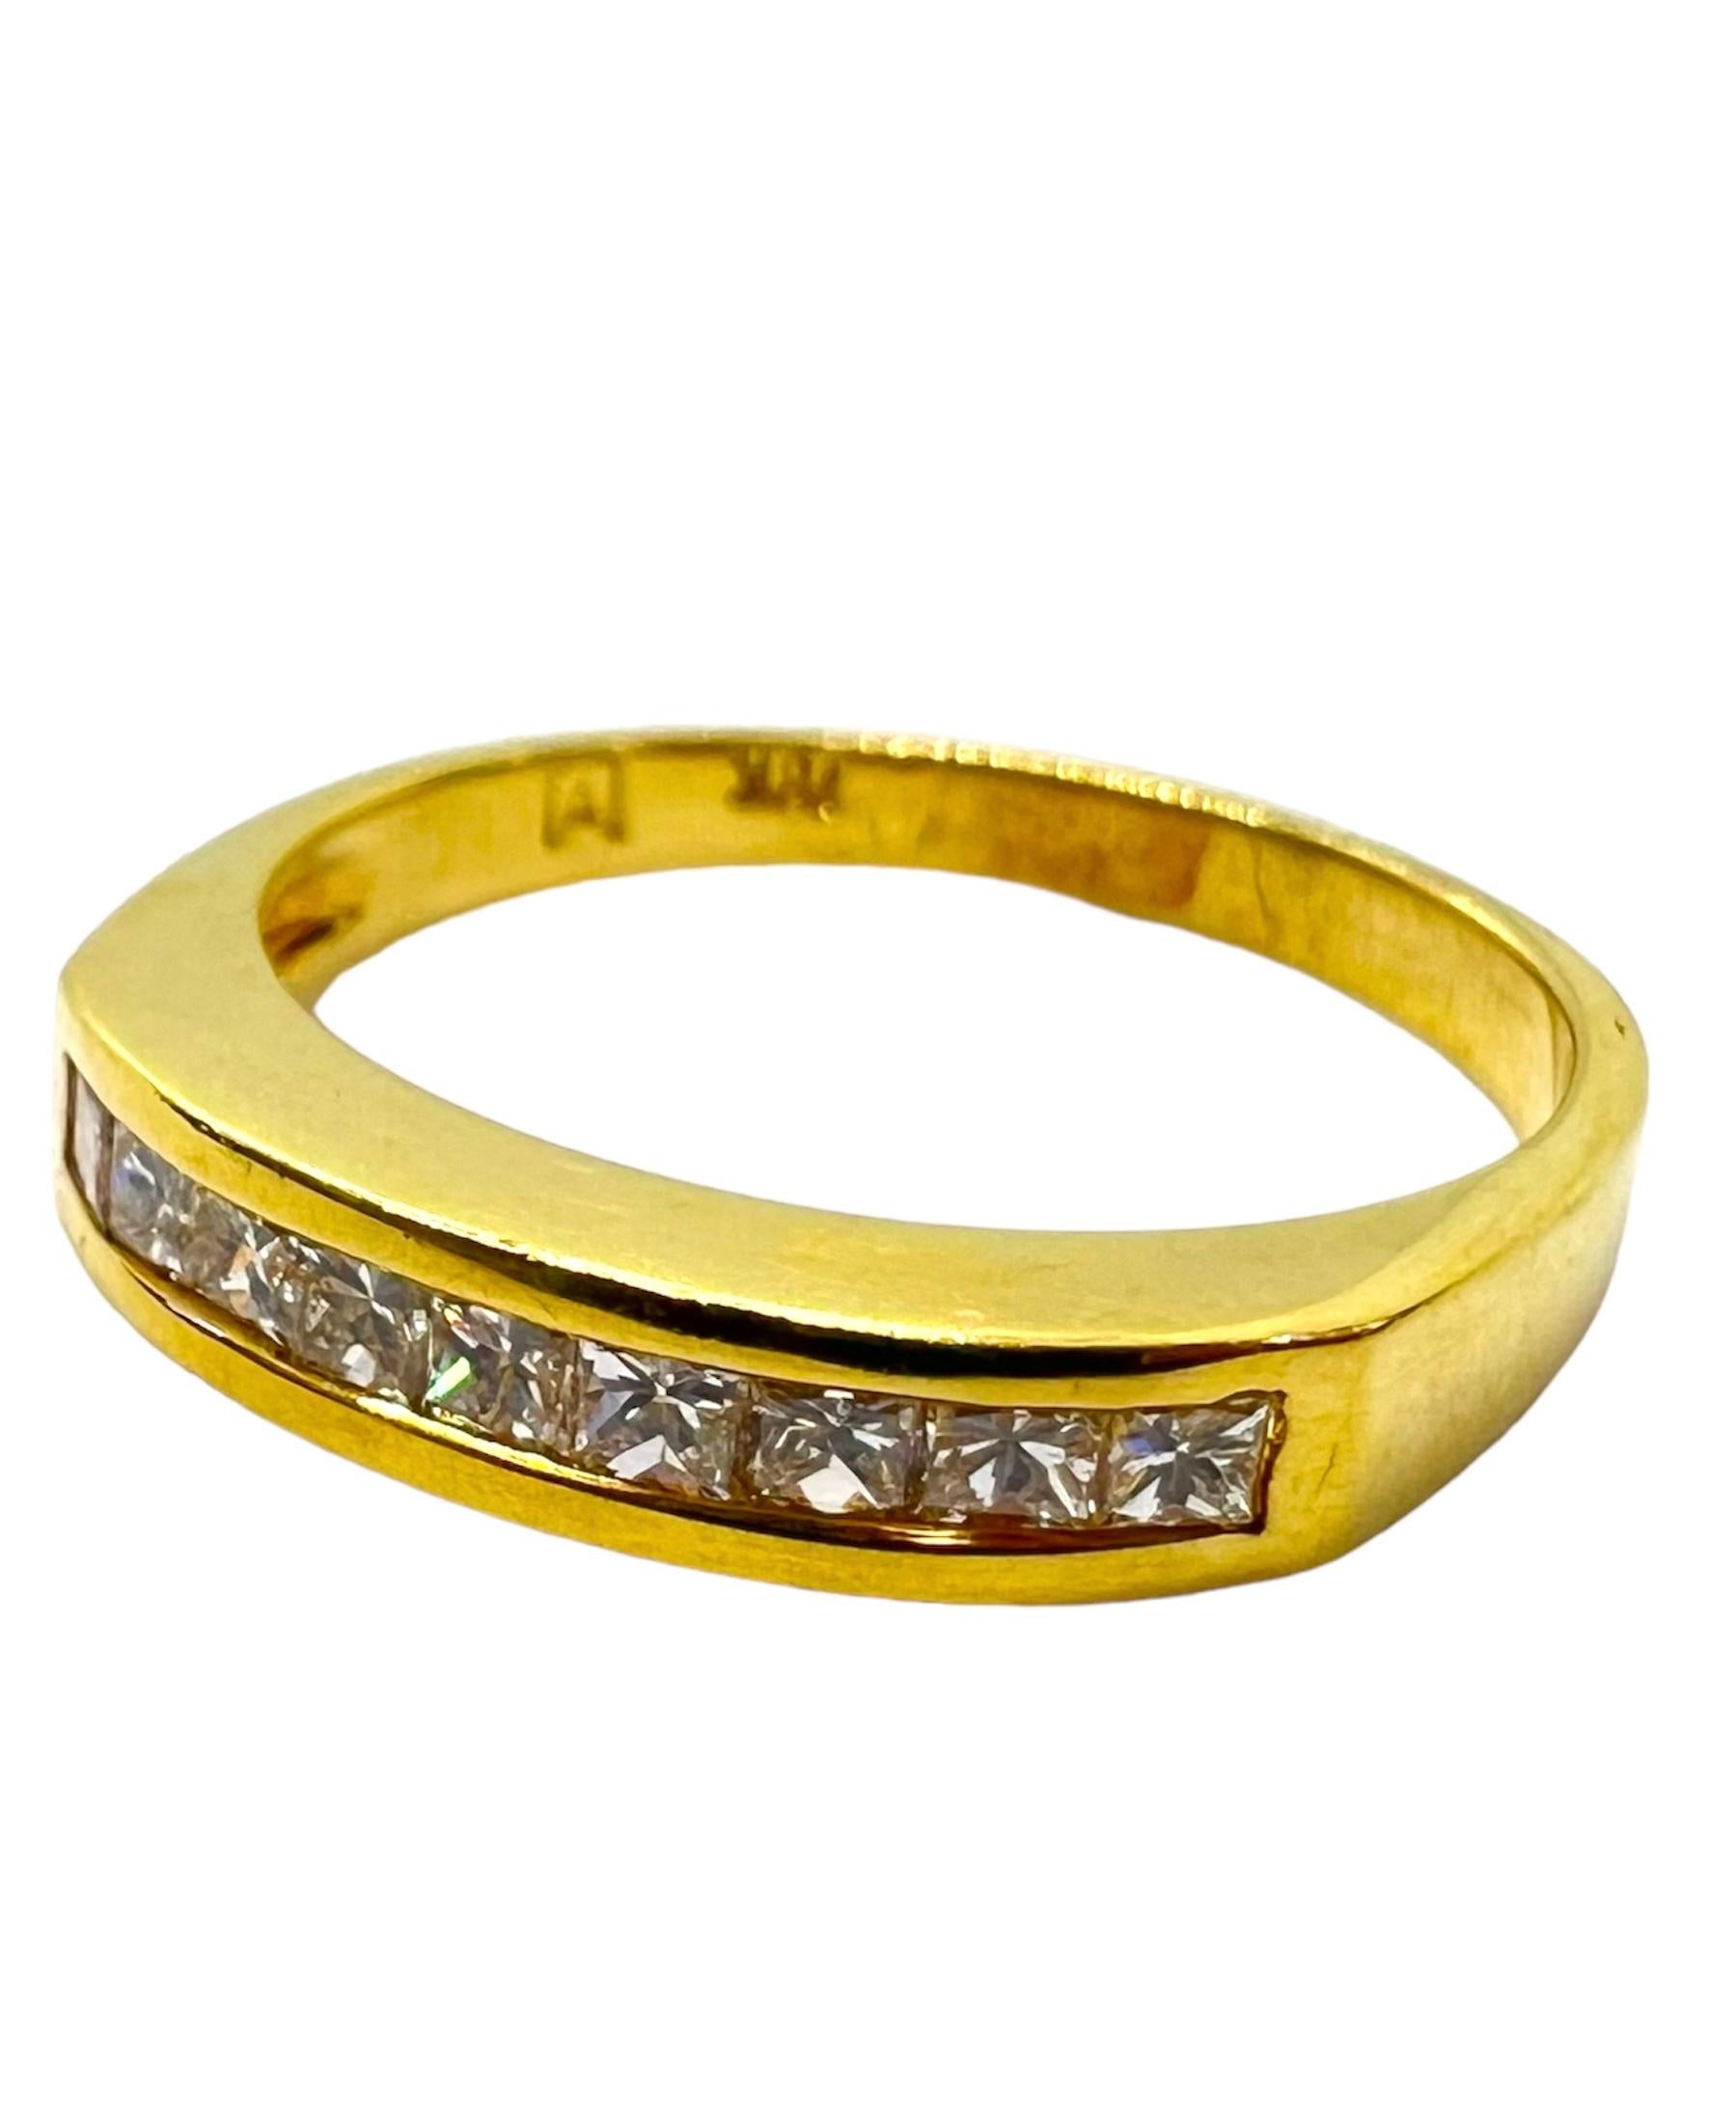 18K yellow gold band ring with square cut diamonds that weigh 0.54 carat.

Sophia D by Joseph Dardashti LTD has been known worldwide for 35 years and are inspired by classic Art Deco design that merges with modern manufacturing techniques.  